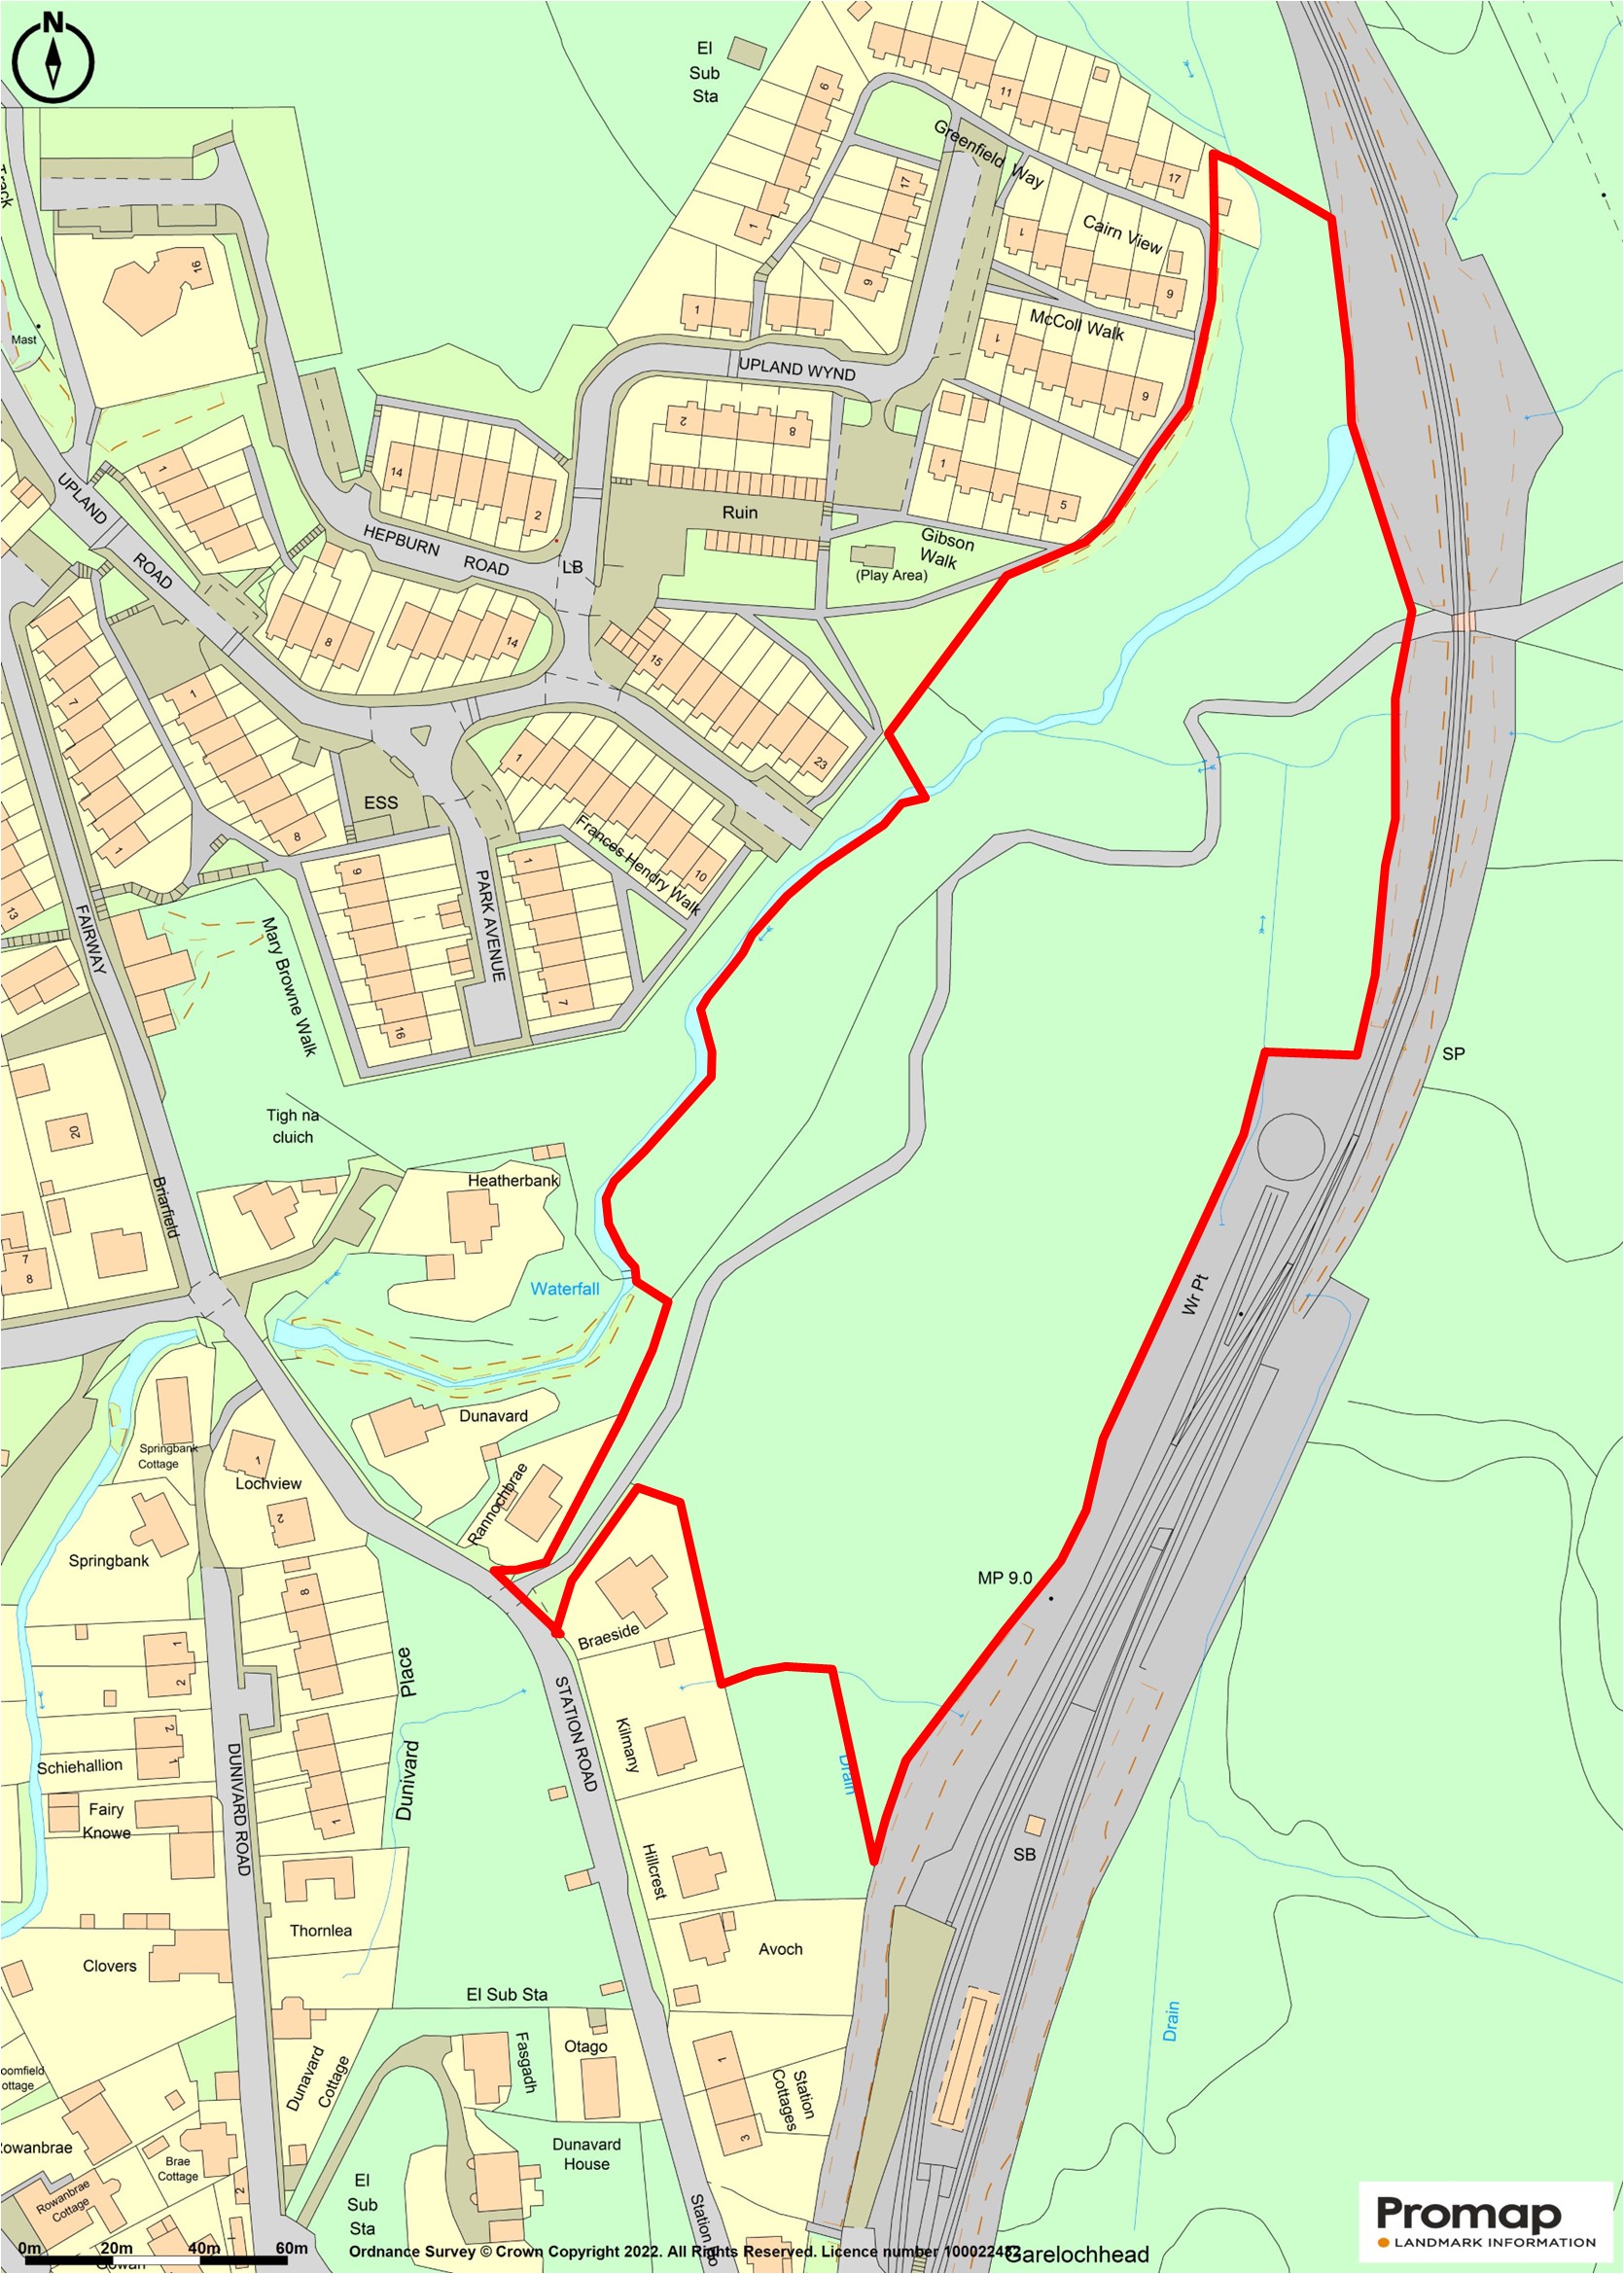 Garelochhead residential development site up for grabs